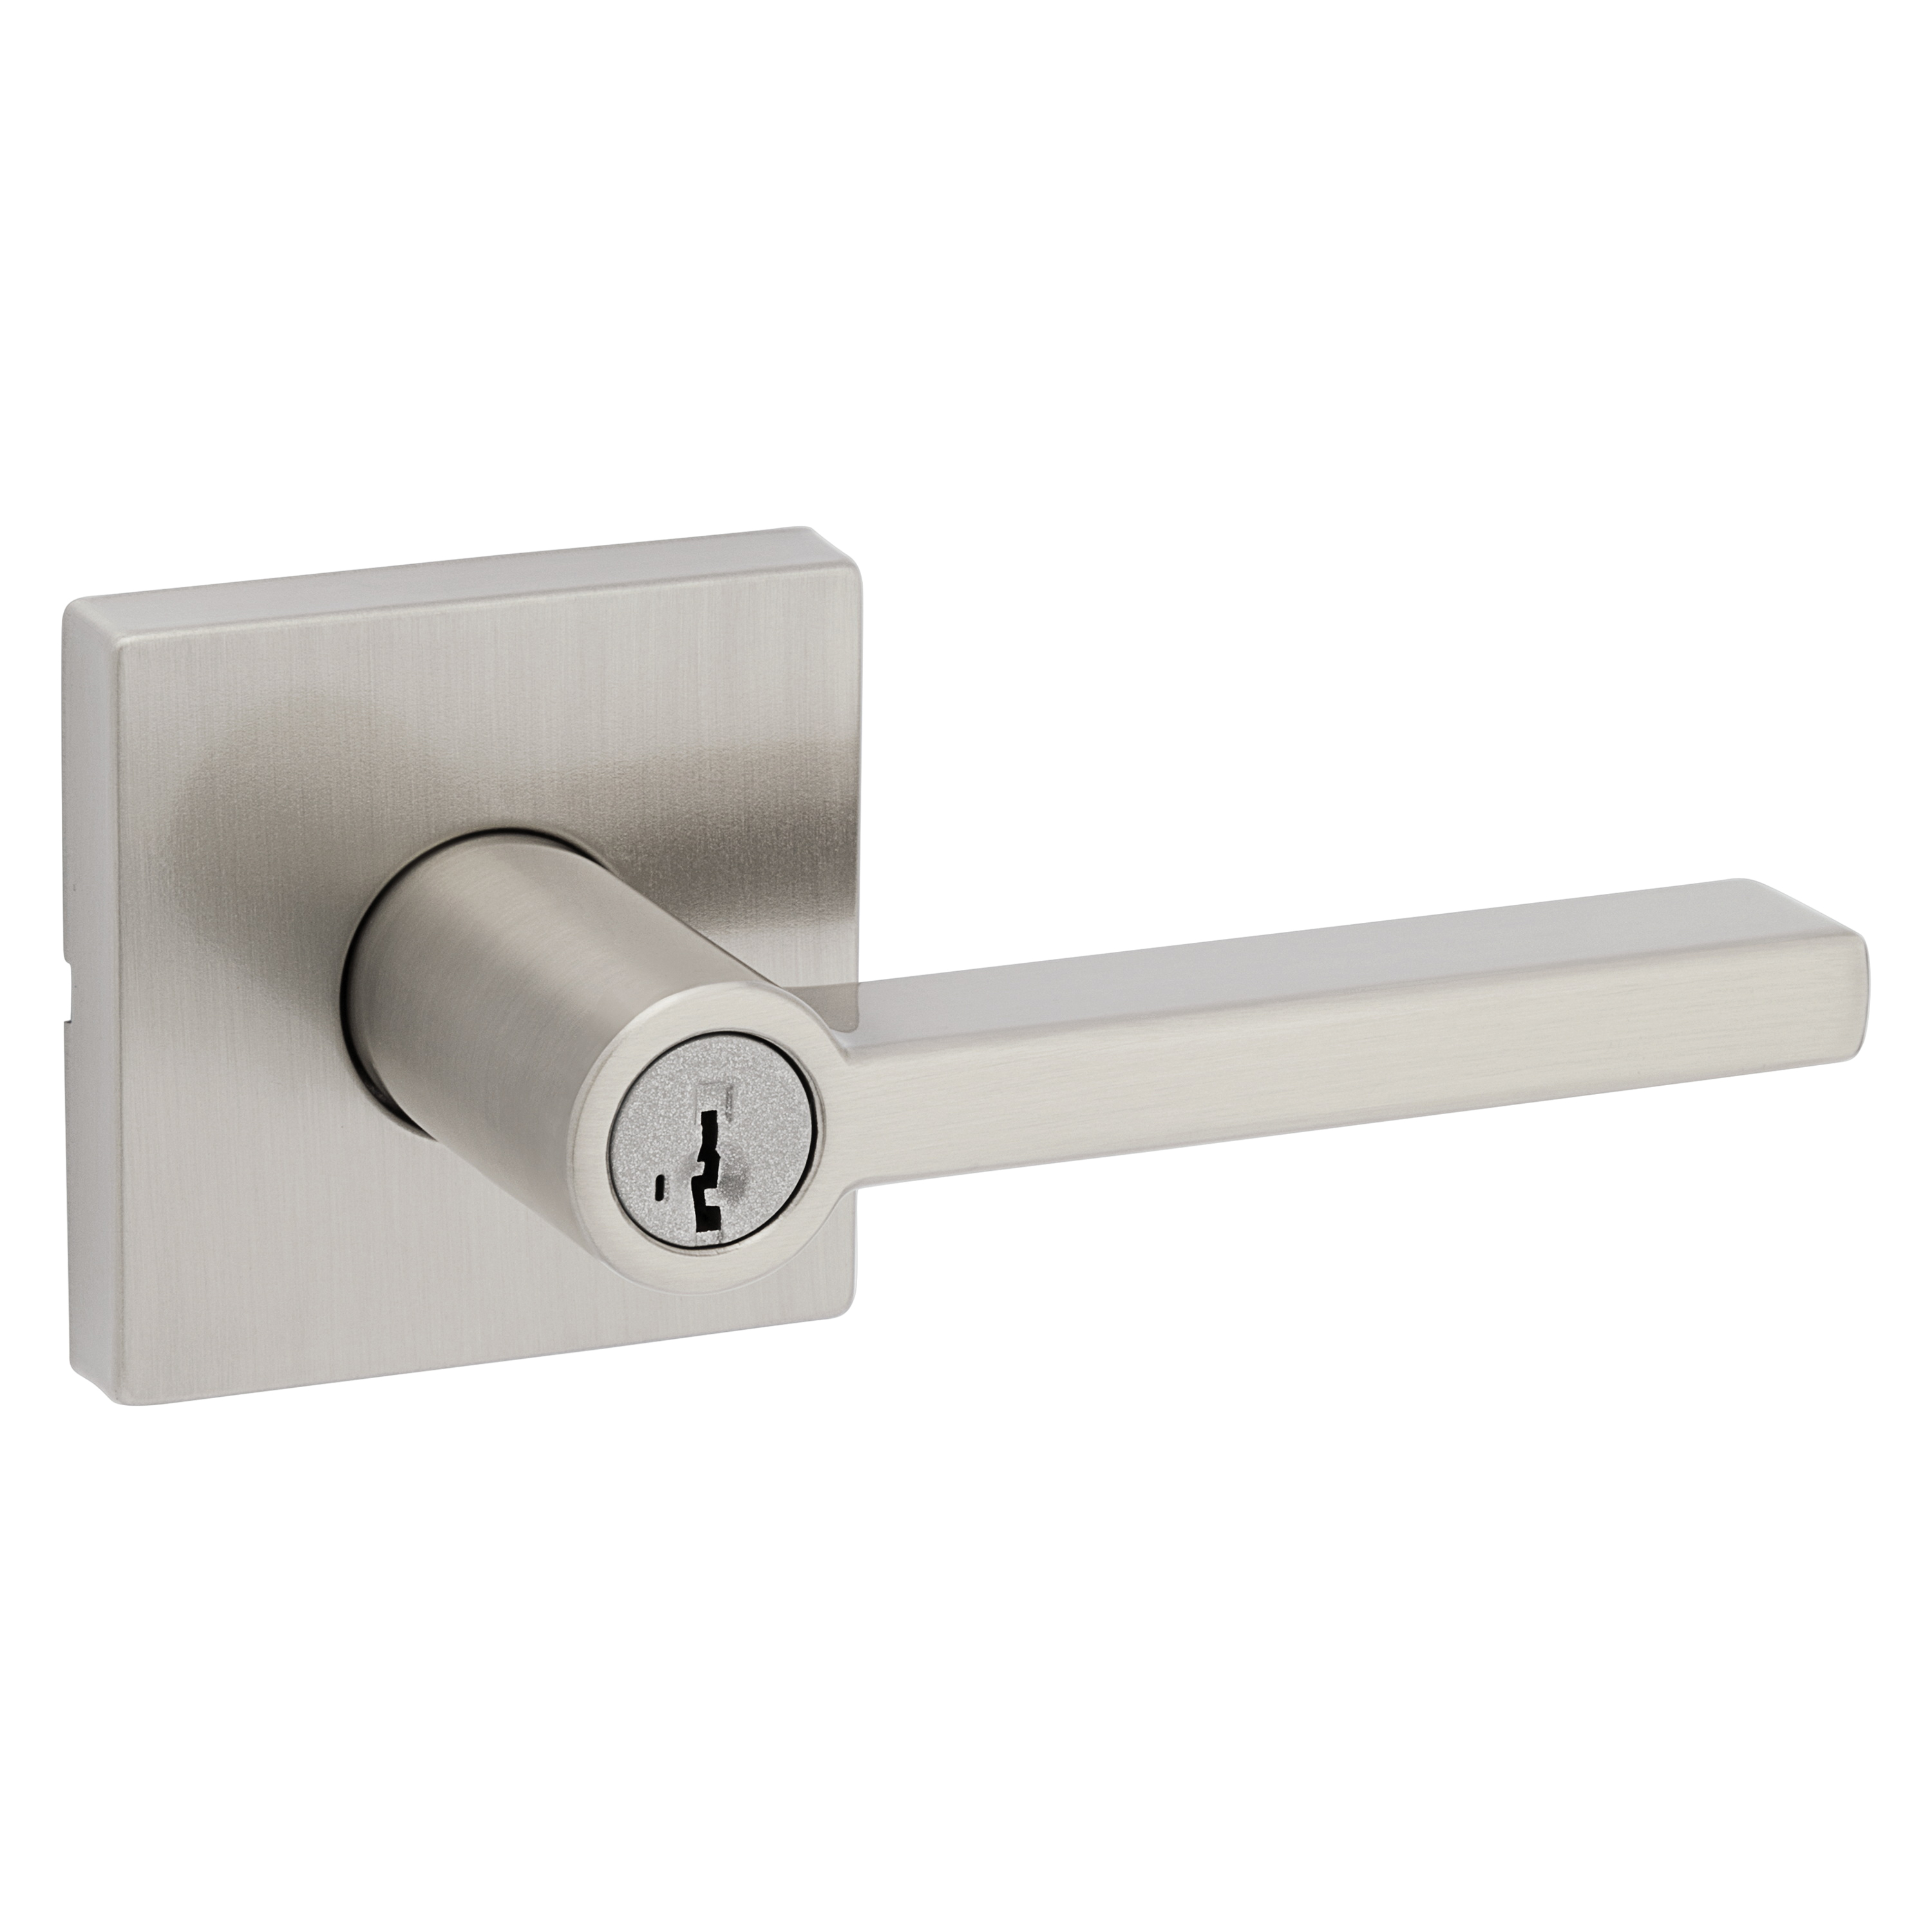 Signature Series 156HFL SQT 15 Entry Lever, Pushbutton Lock, Satin Nickel, Metal, Residential, Reversible Hand